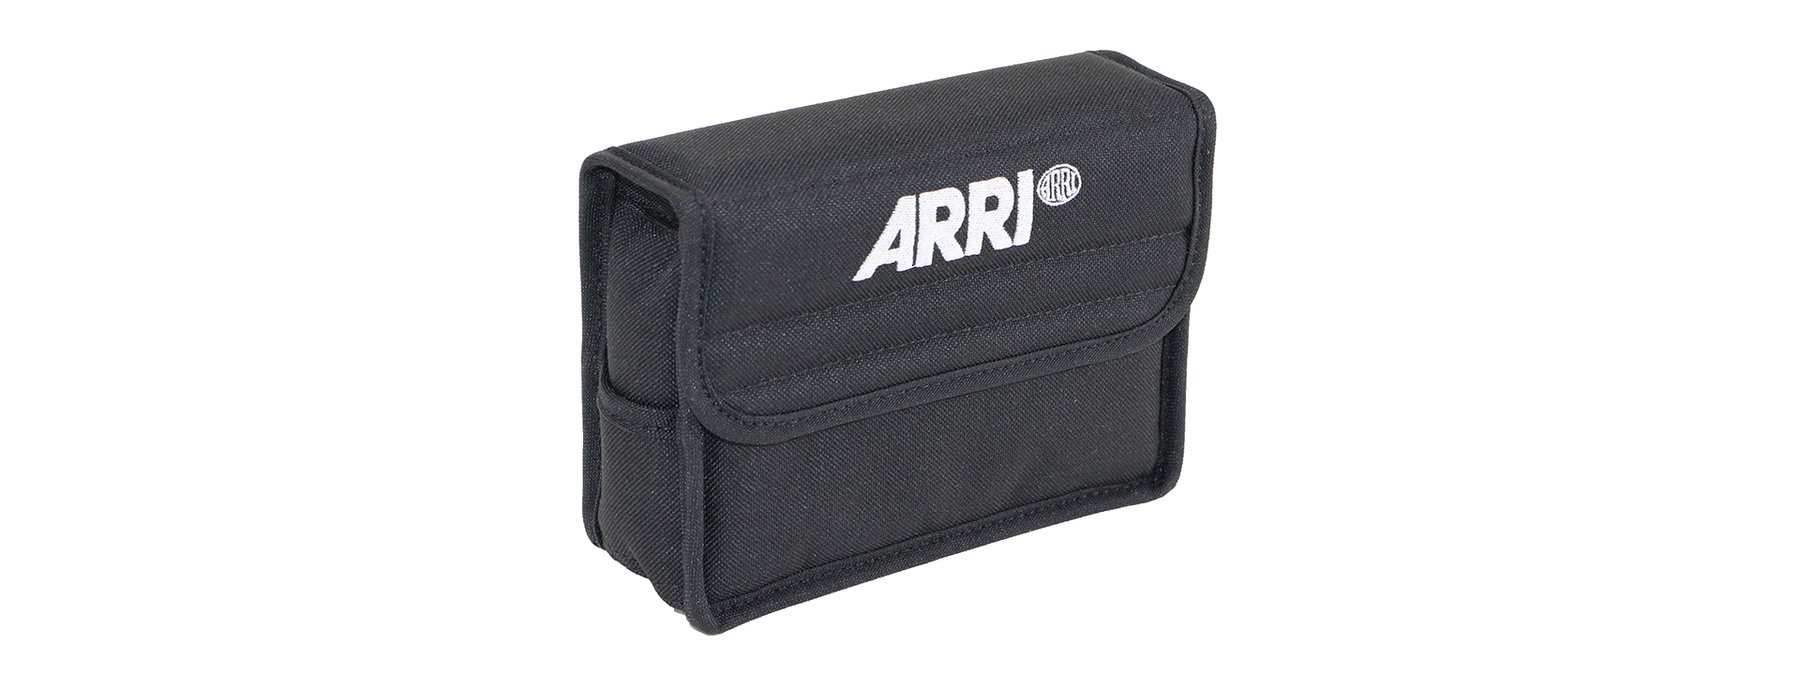 ARRI Control Panel Orbiter Carrying Pouch